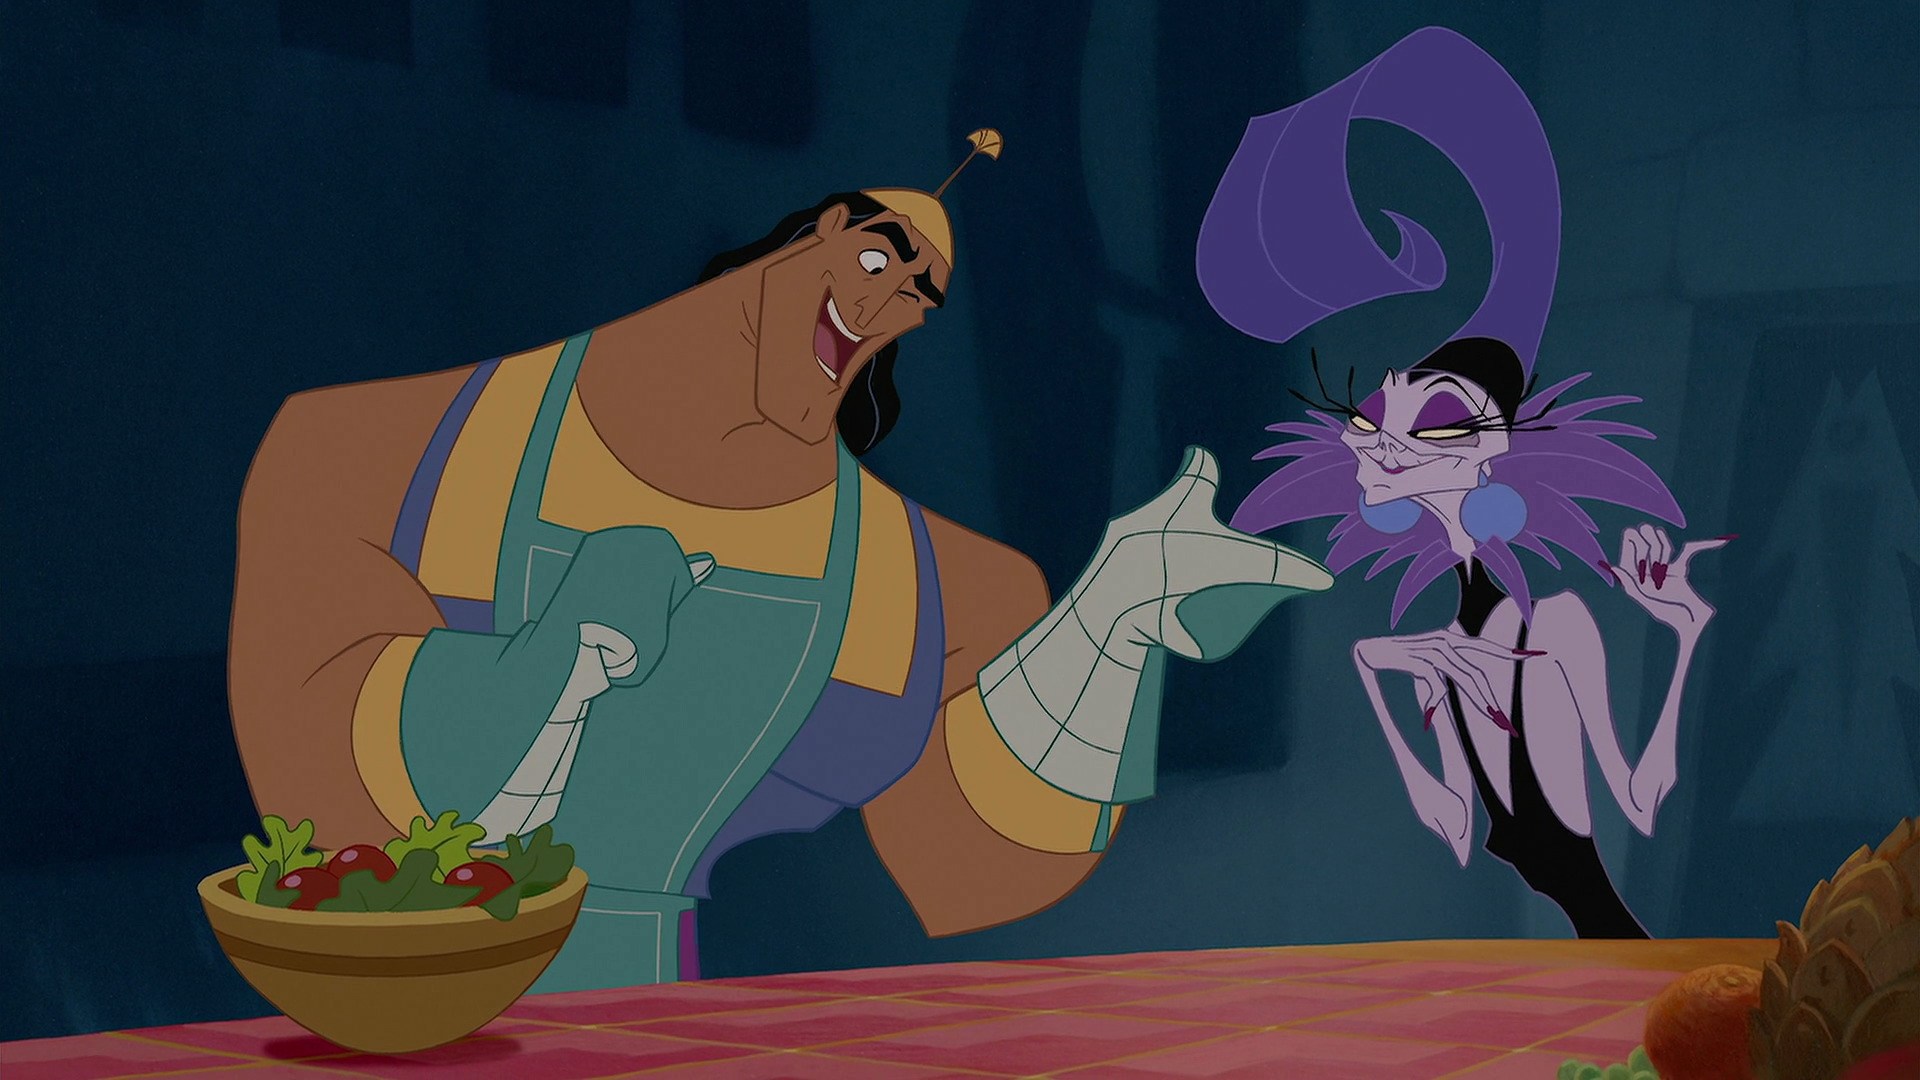 kronk and yzma dinner party